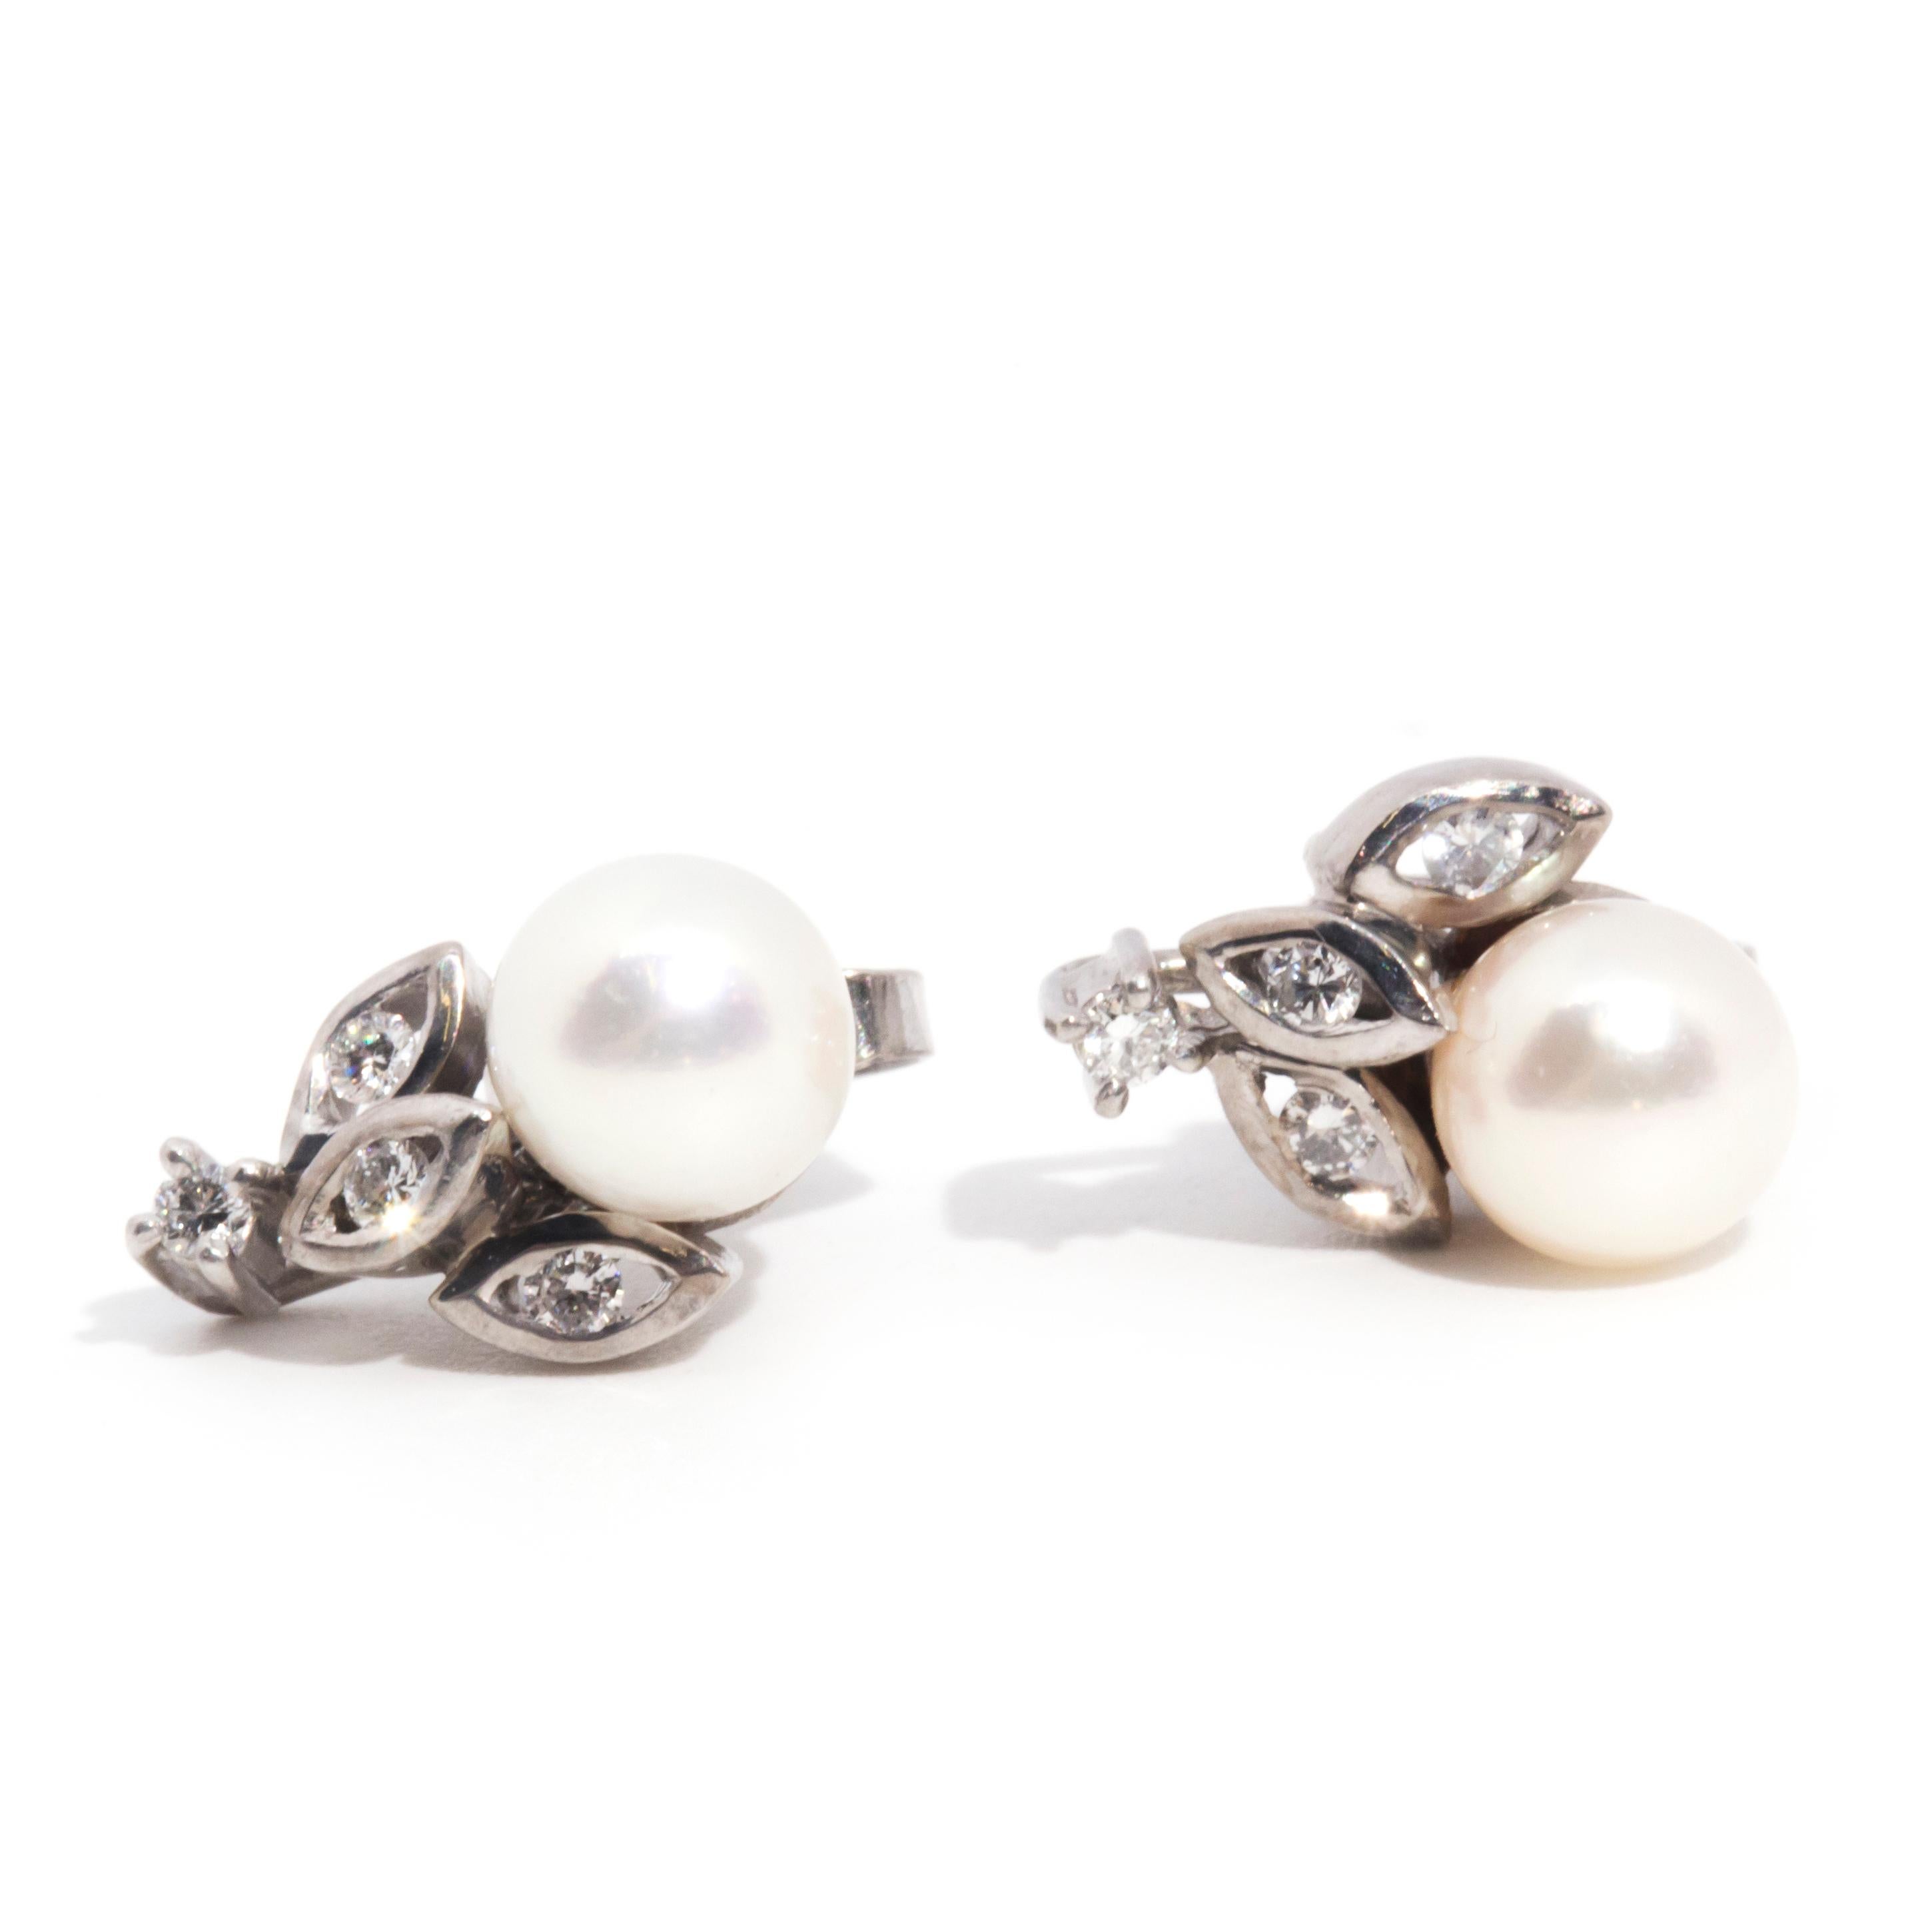 Modern Circa 1970s 18 Carat White Gold Diamond and Akoya Pearl Vintage Cluster Earrings For Sale